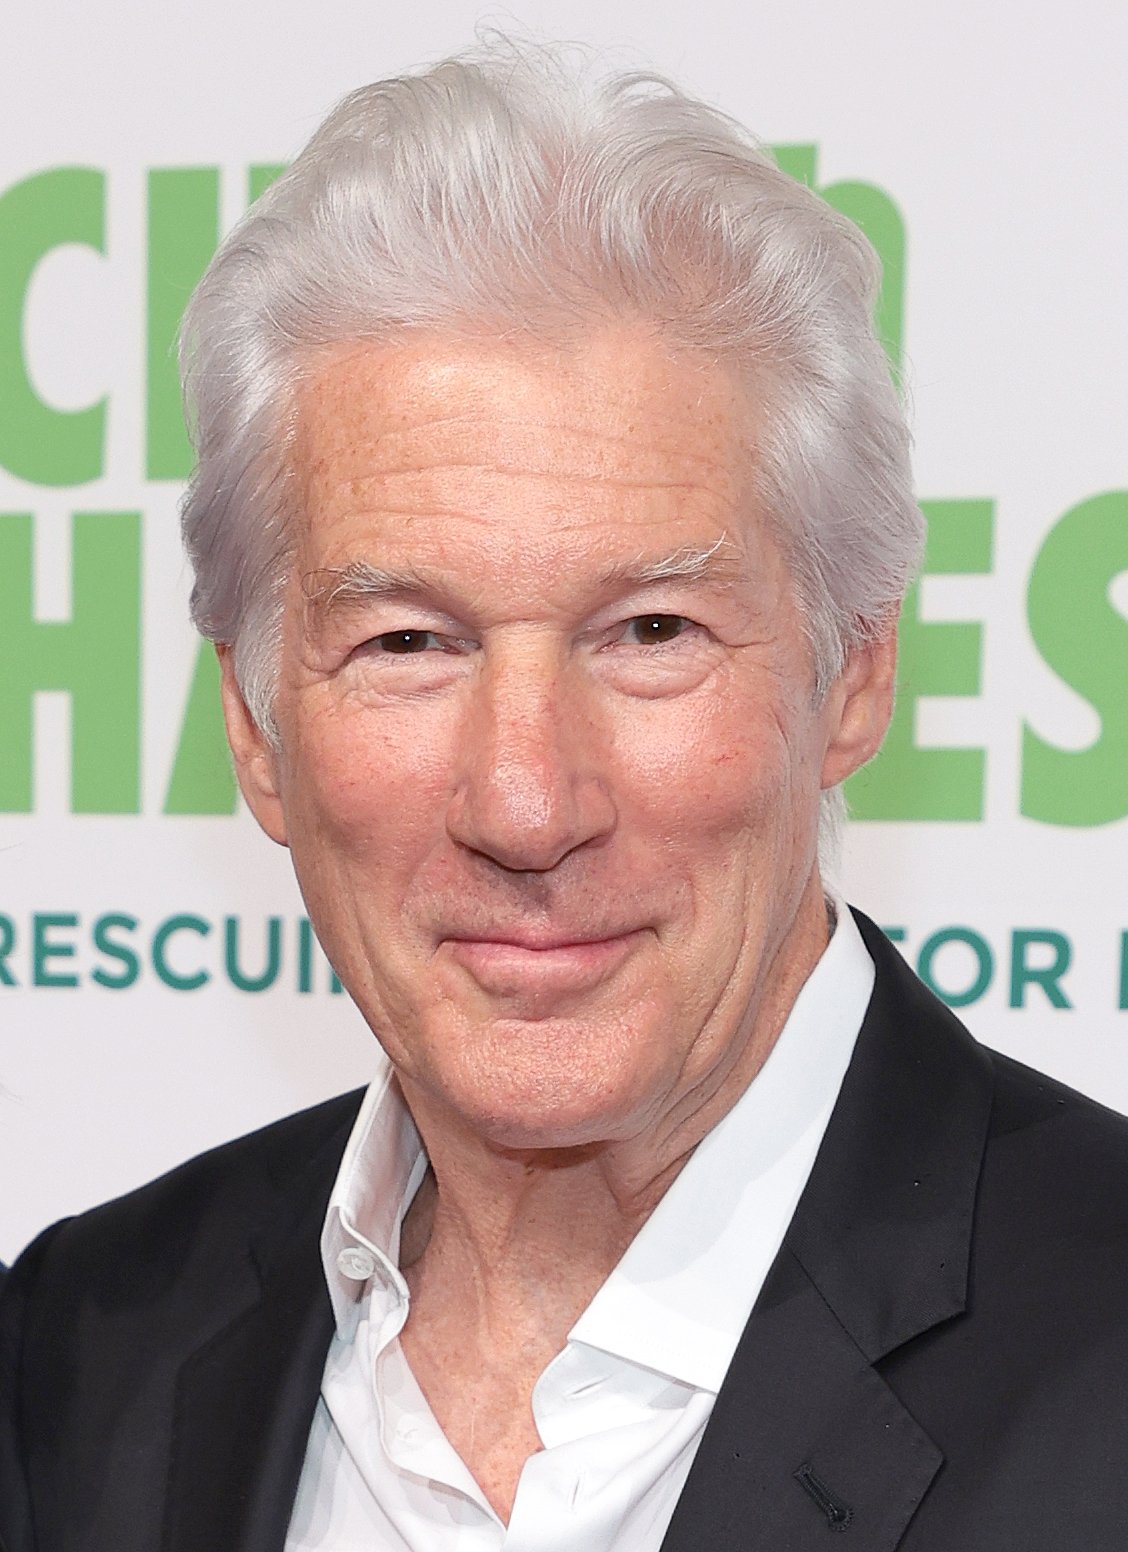 Richard Gere during the City Harvest Presents The 2022 Gala: Red Supper Club at Cipriani 42nd Street on April 26, 2022 in New York. / Source: Getty Images